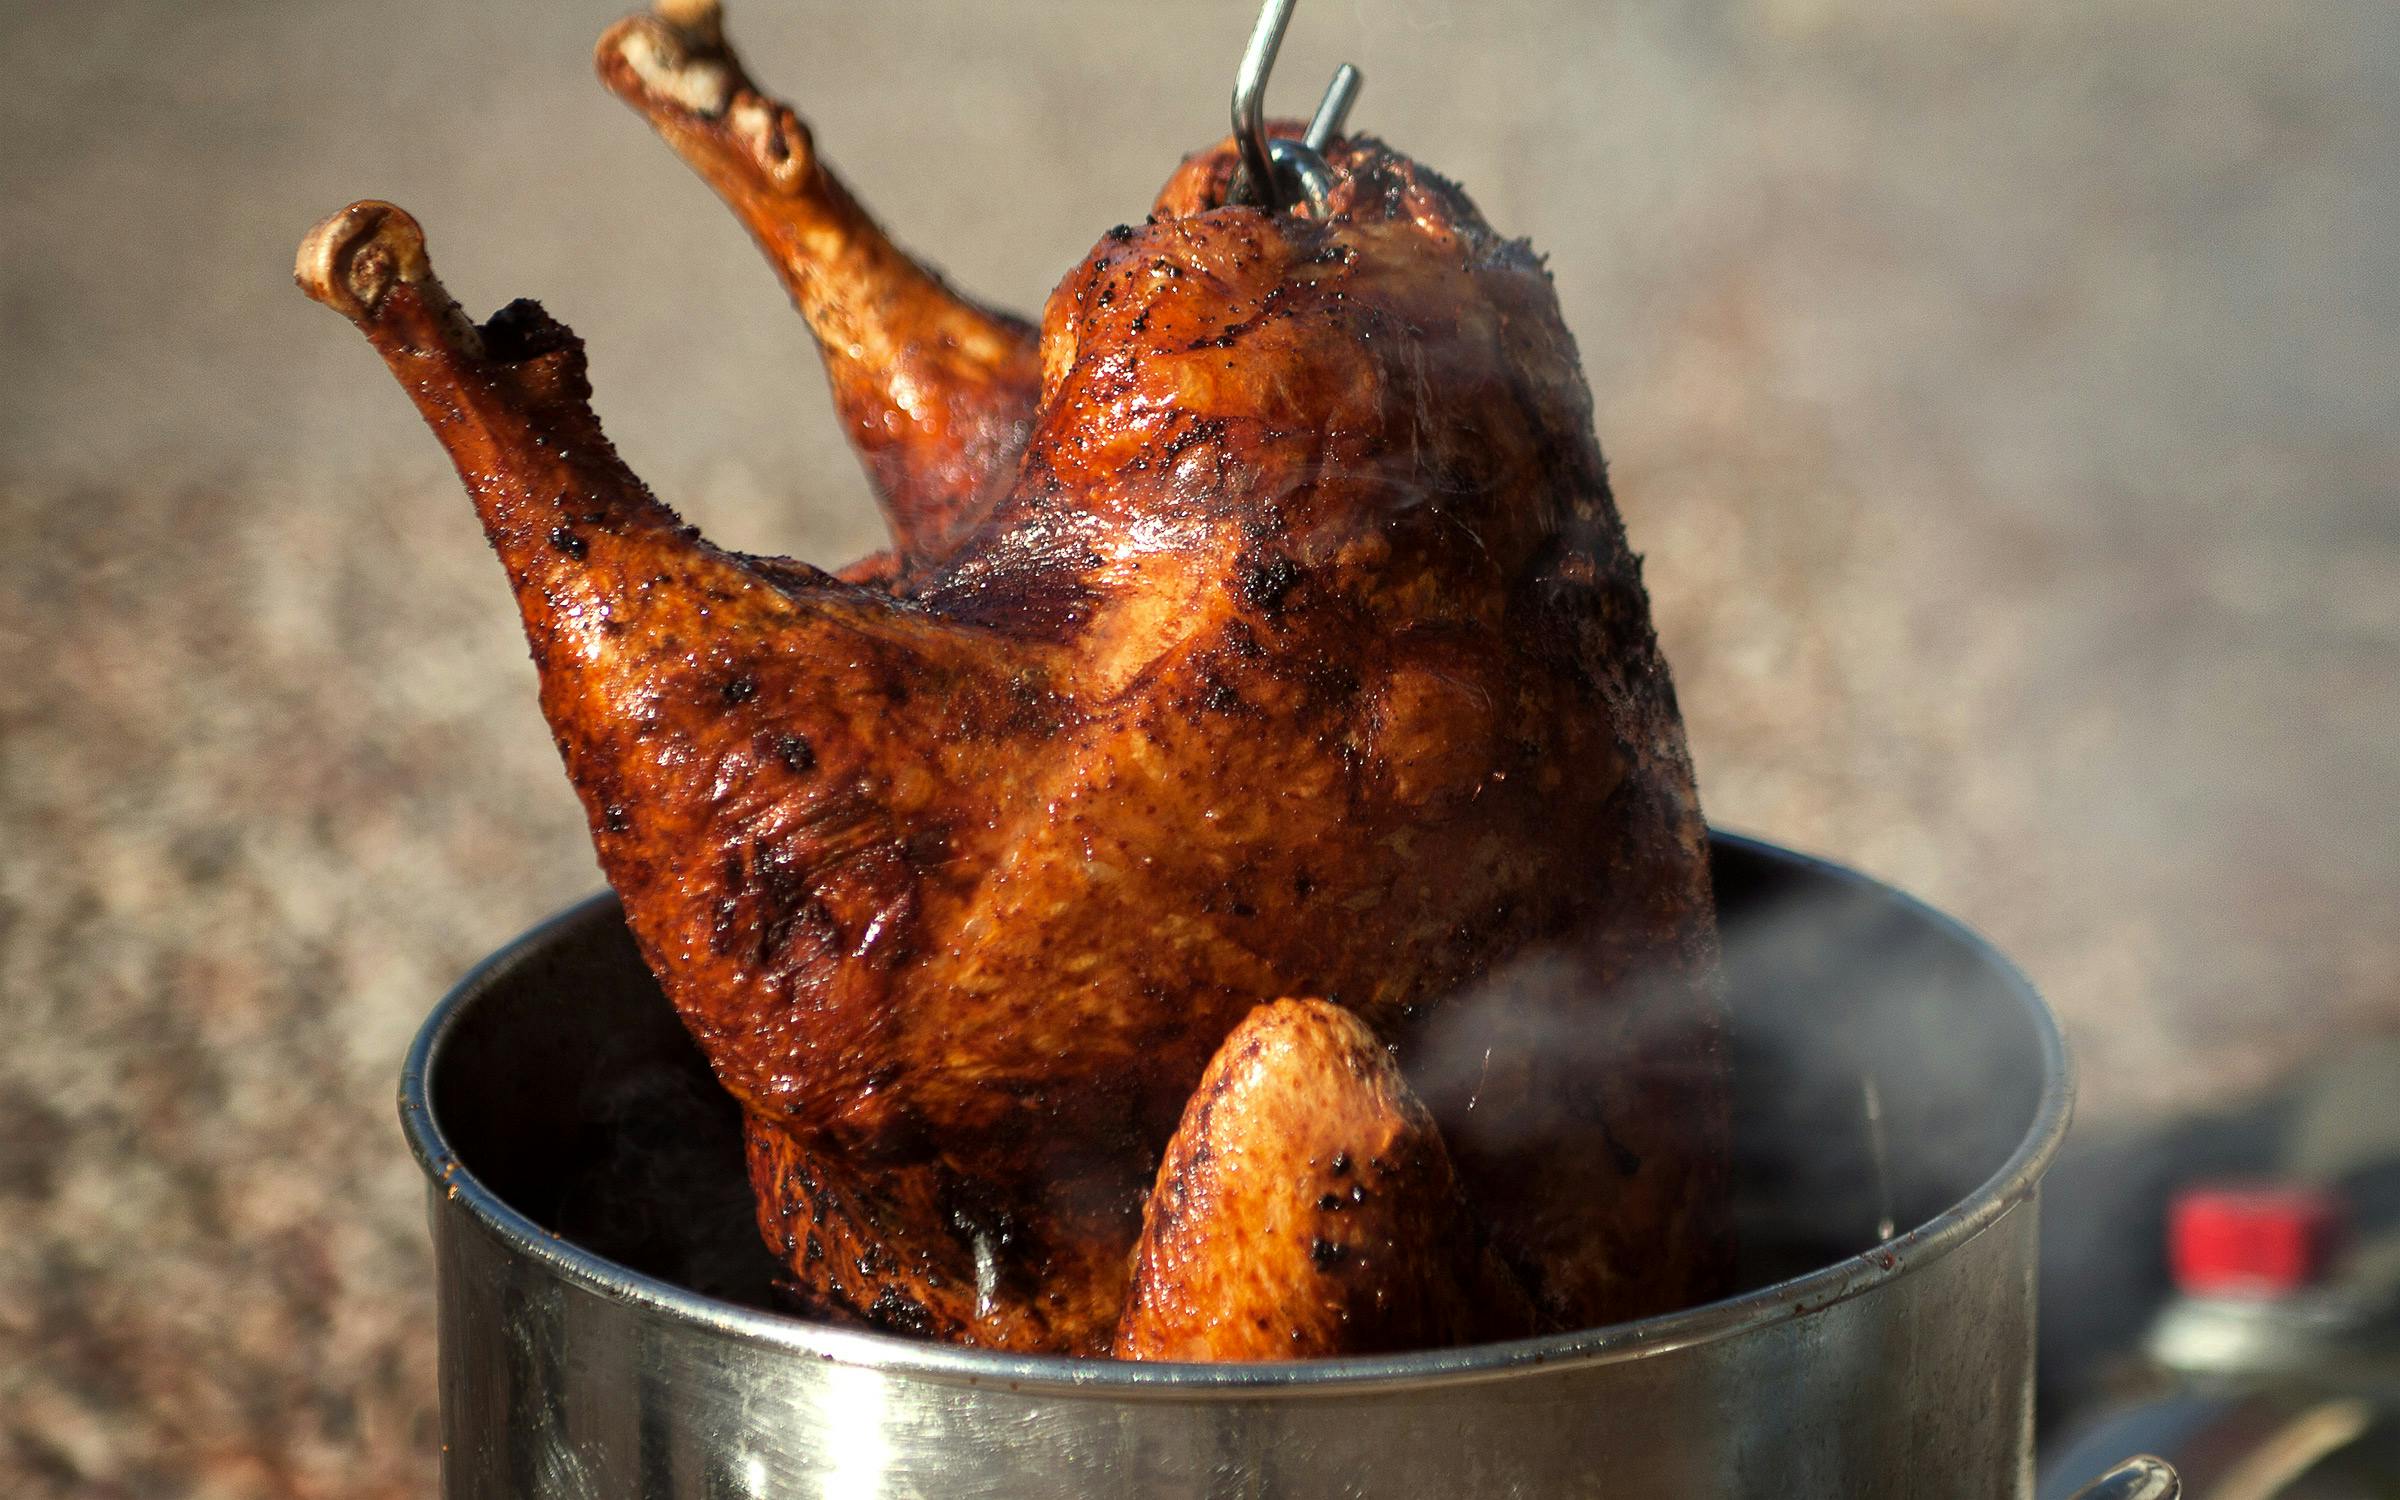 Deep Fryer Turkey Thermometer with Clip&15 inch - Best